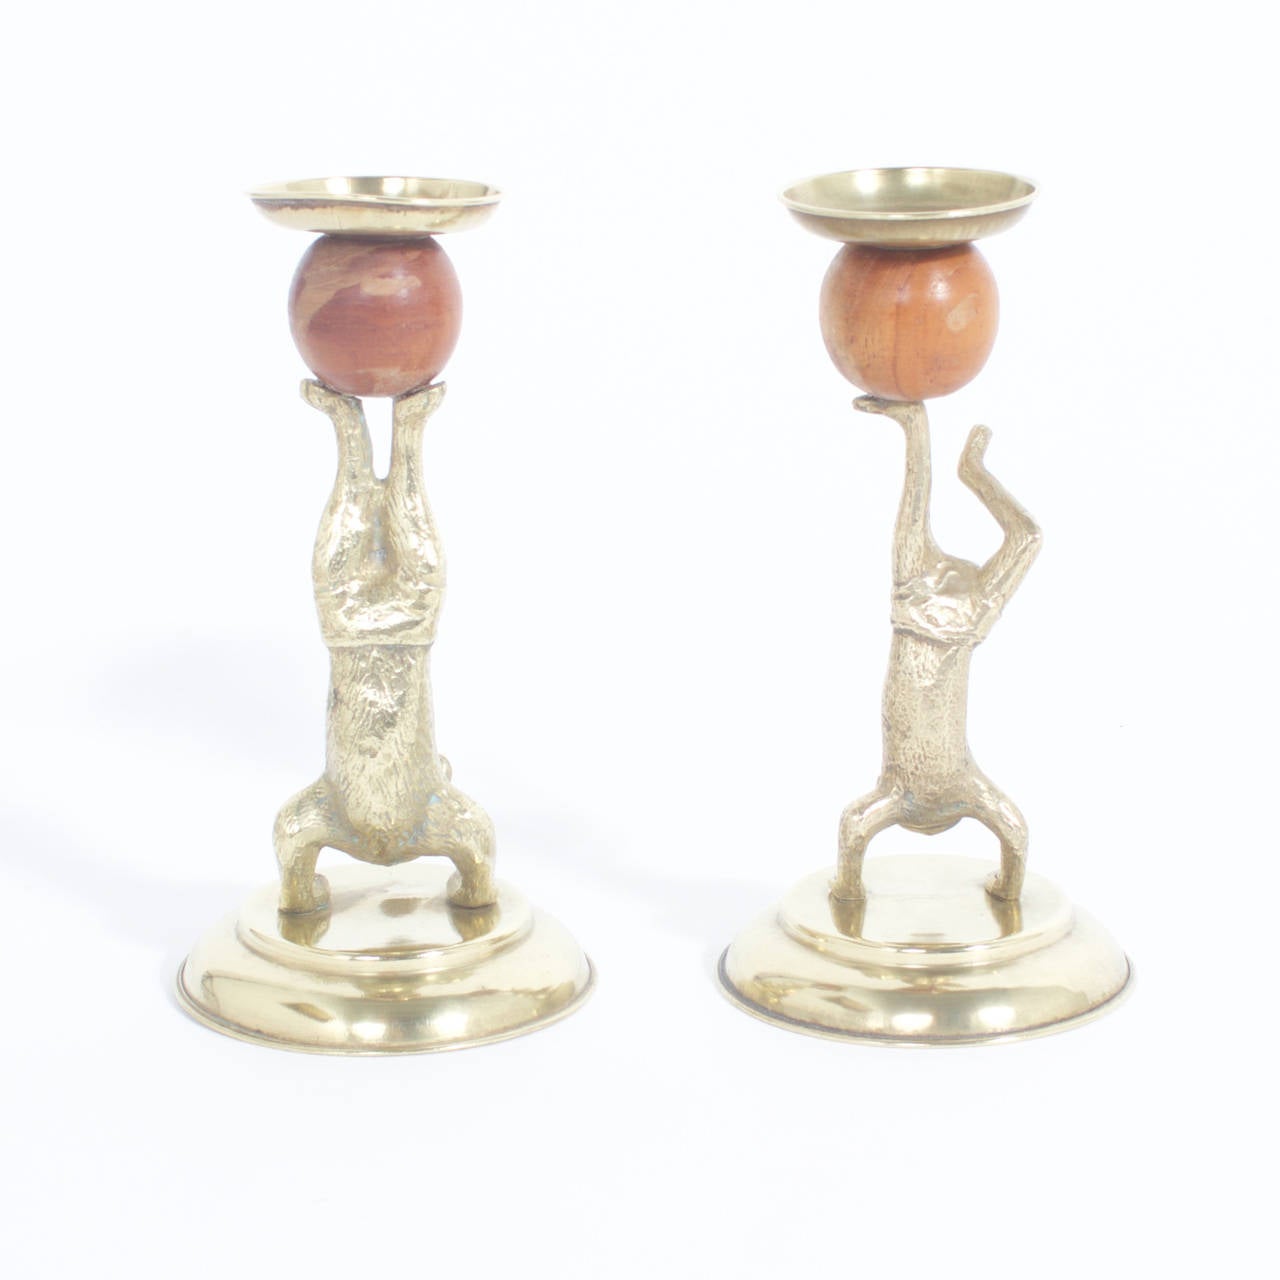 Arthur Court midcentury brass figurative candlesticks depicting a cat and a monkey in swimming trunks in a circus pose balancing a wooden ball on their feet. Signed Arthur Court designs 1977 on the bottom. Newly polished.